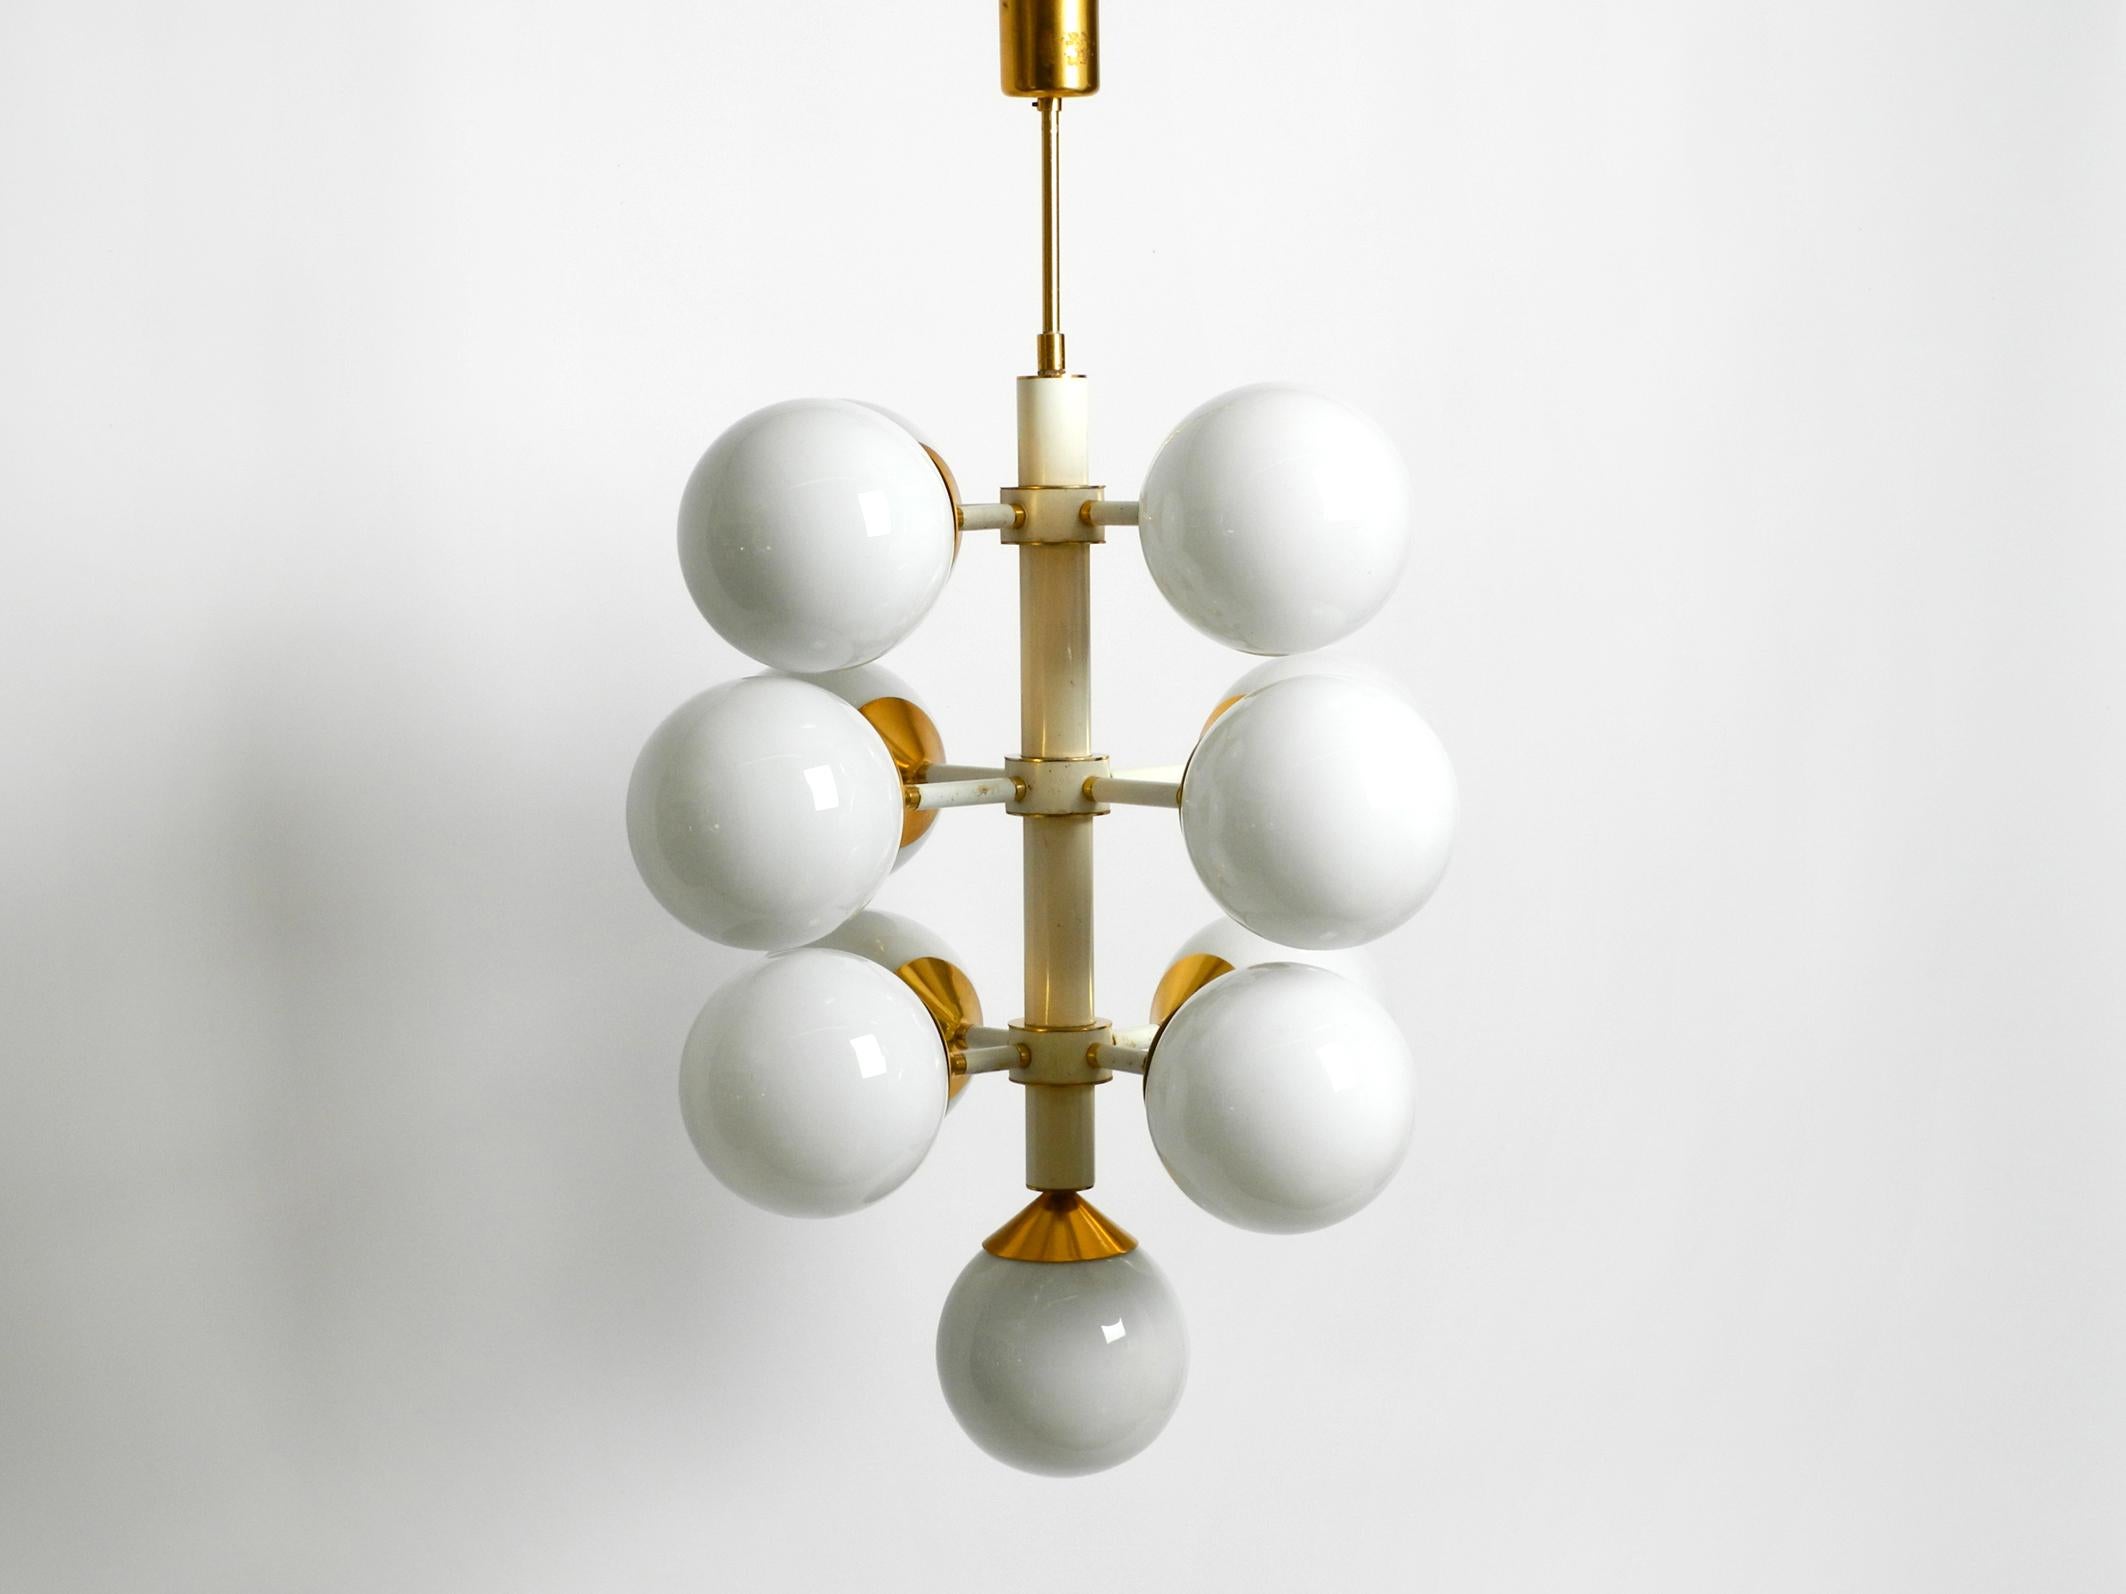 Beautiful rare large 1960's Space Age brass ceiling lamp with 13 white spherical glasses.
Frame is made entirely of metal.
The cups for the glass balls are made of brass with an anodized copper color.
Made in Germany. Great sixties Space Age